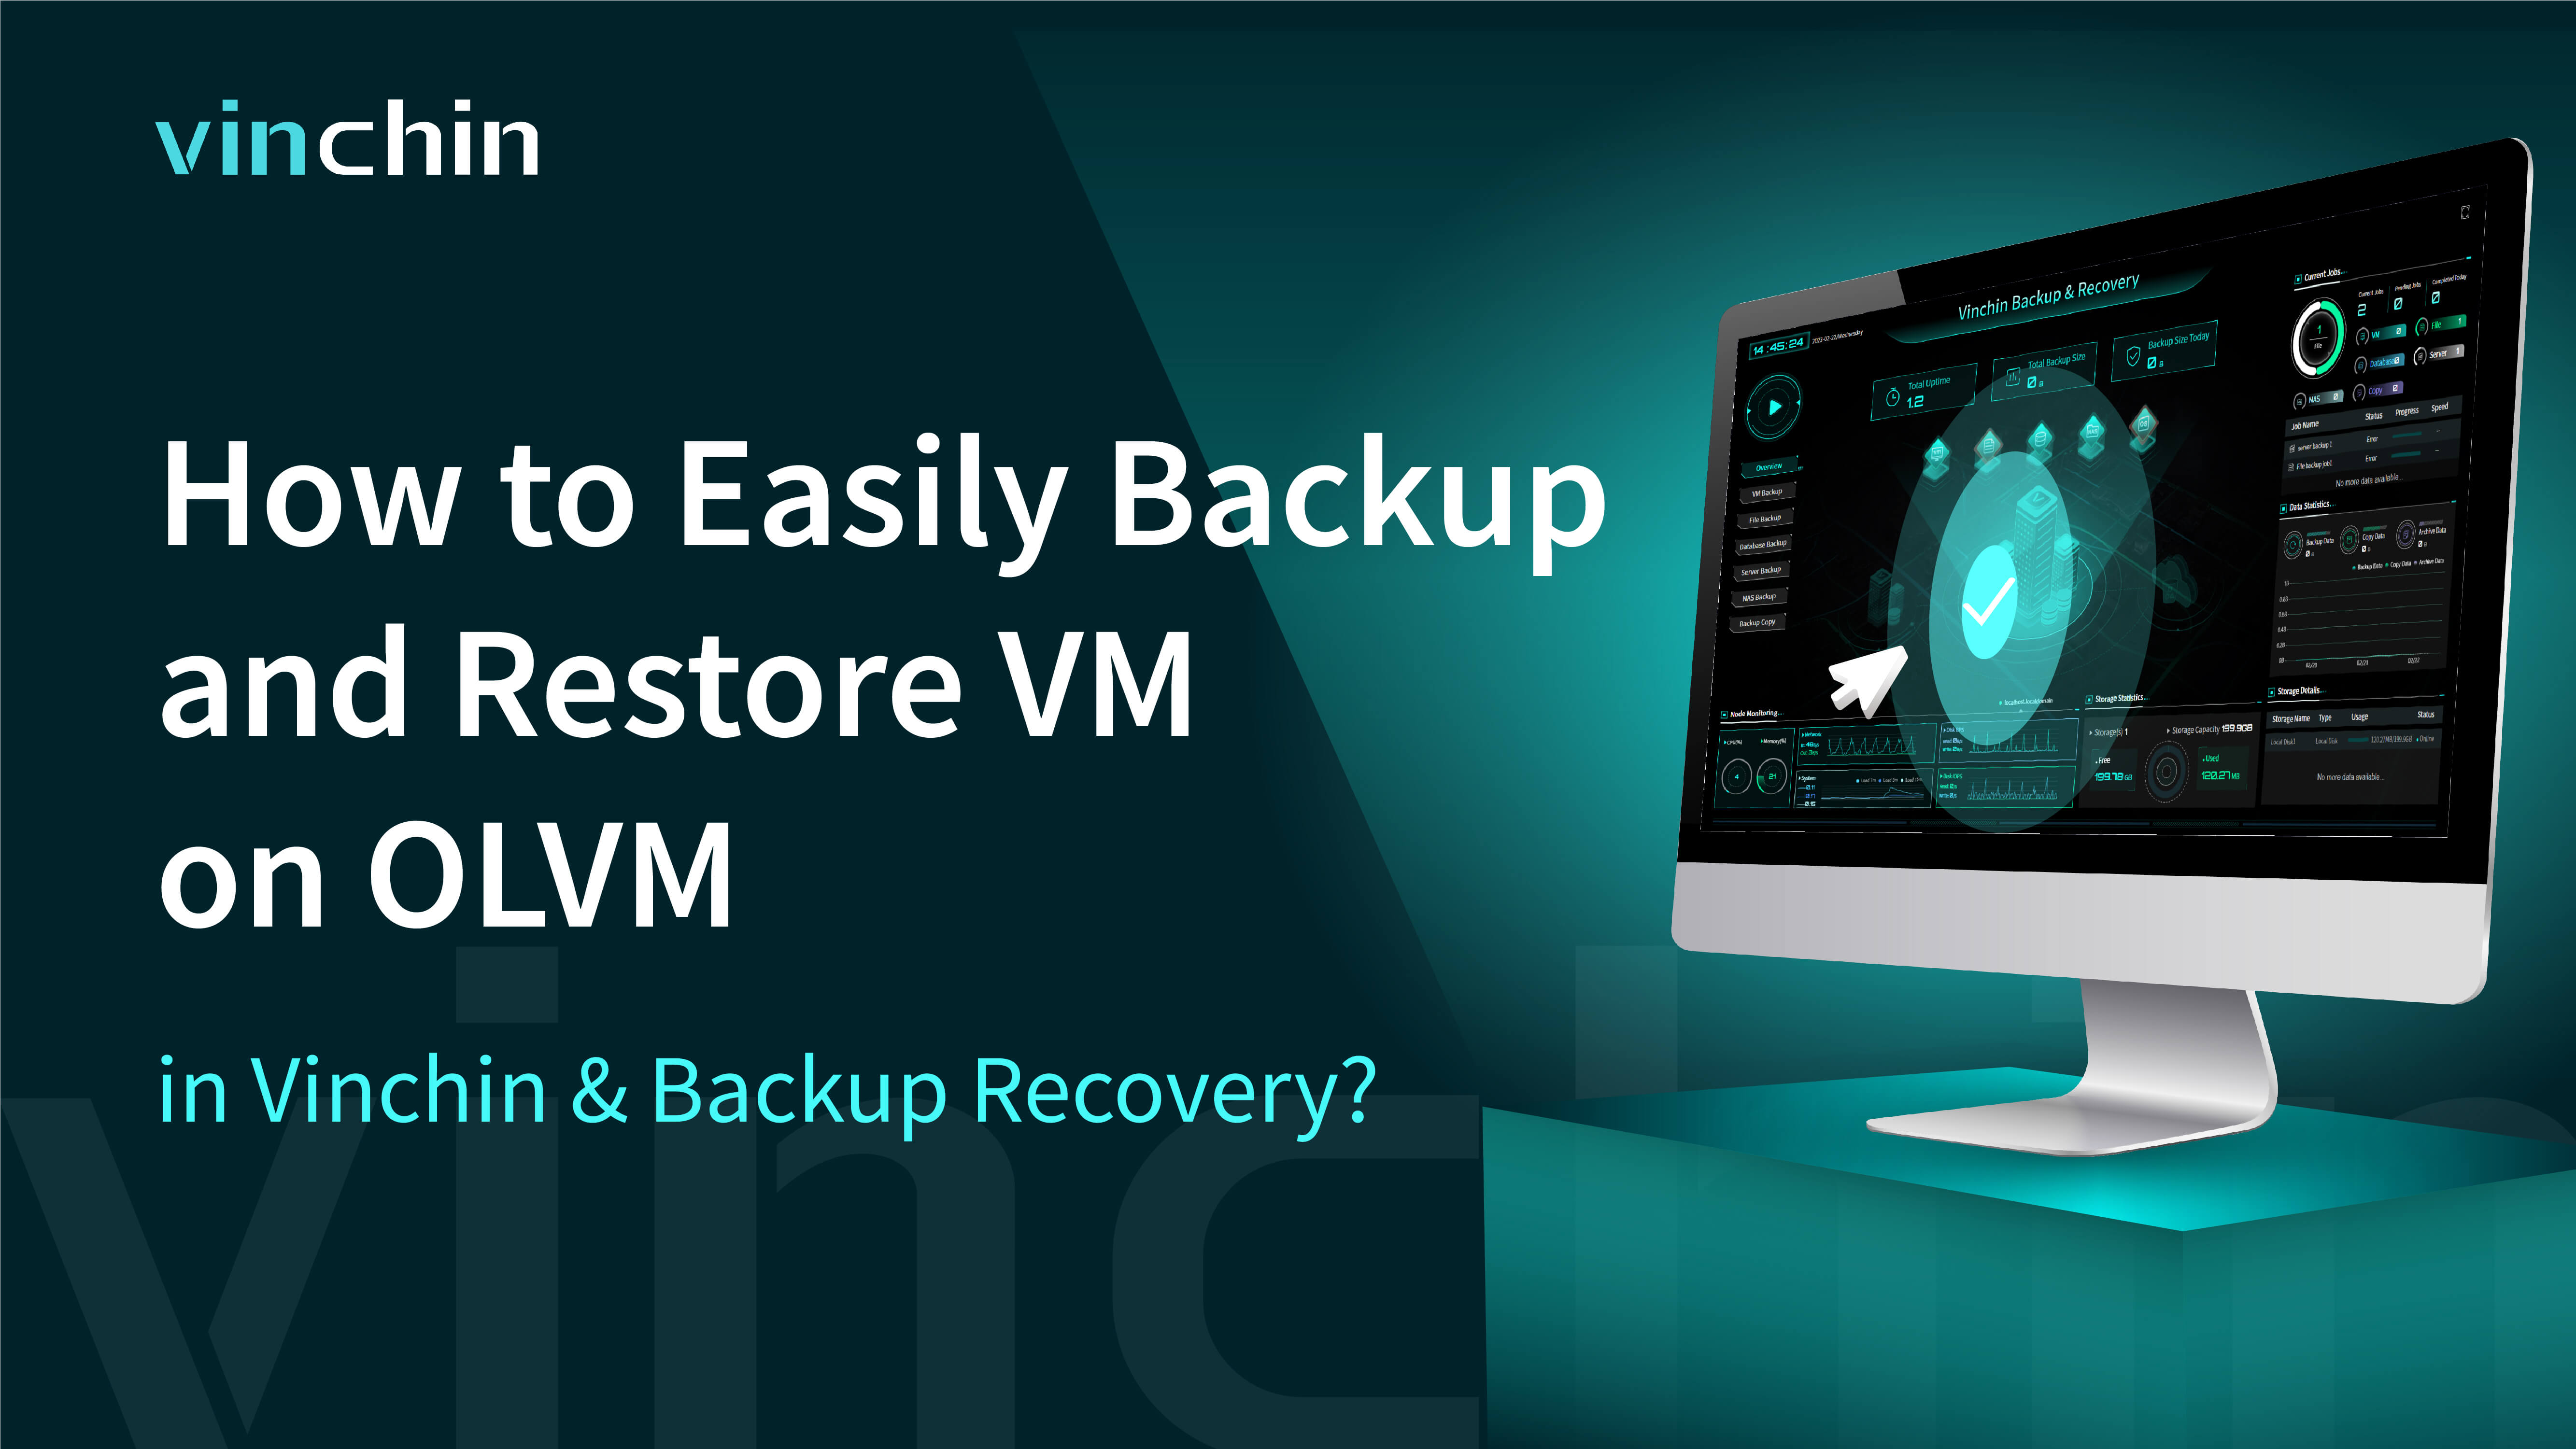 How to Easily Backup and Restore VM on OLVM in Vinchin Backup & Recovery?